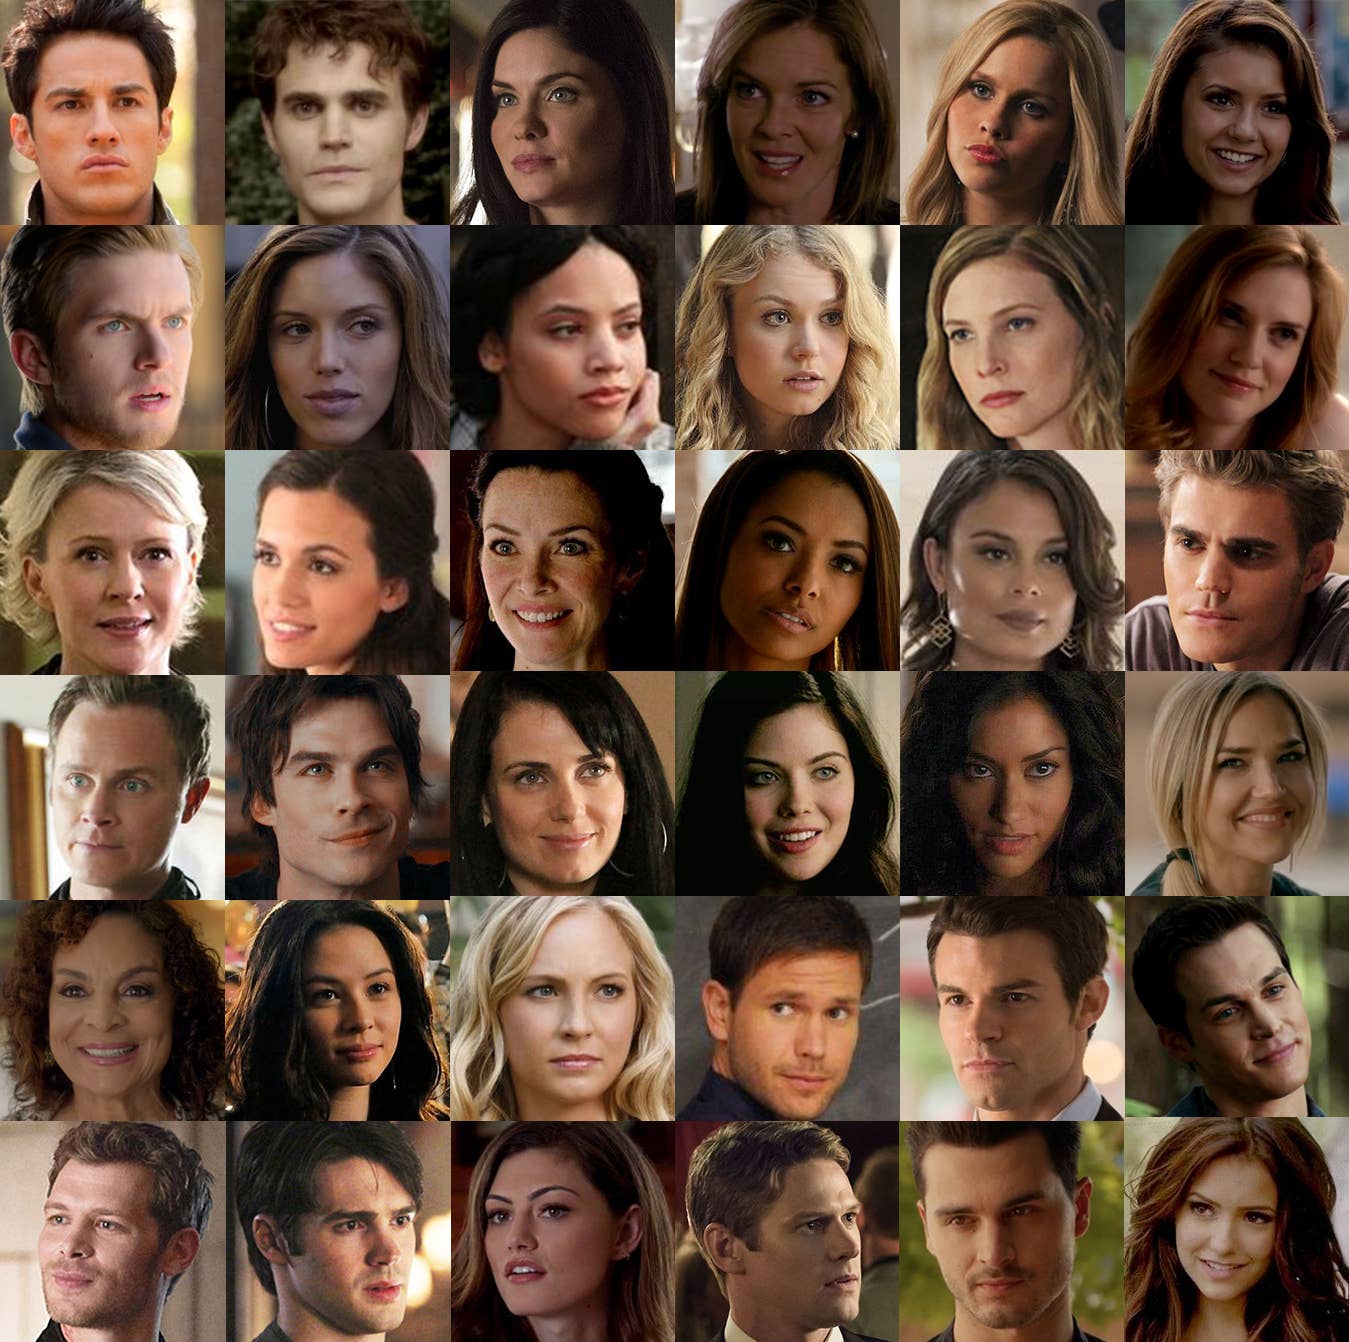 List of The Vampire Diaries characters - Wikipedia